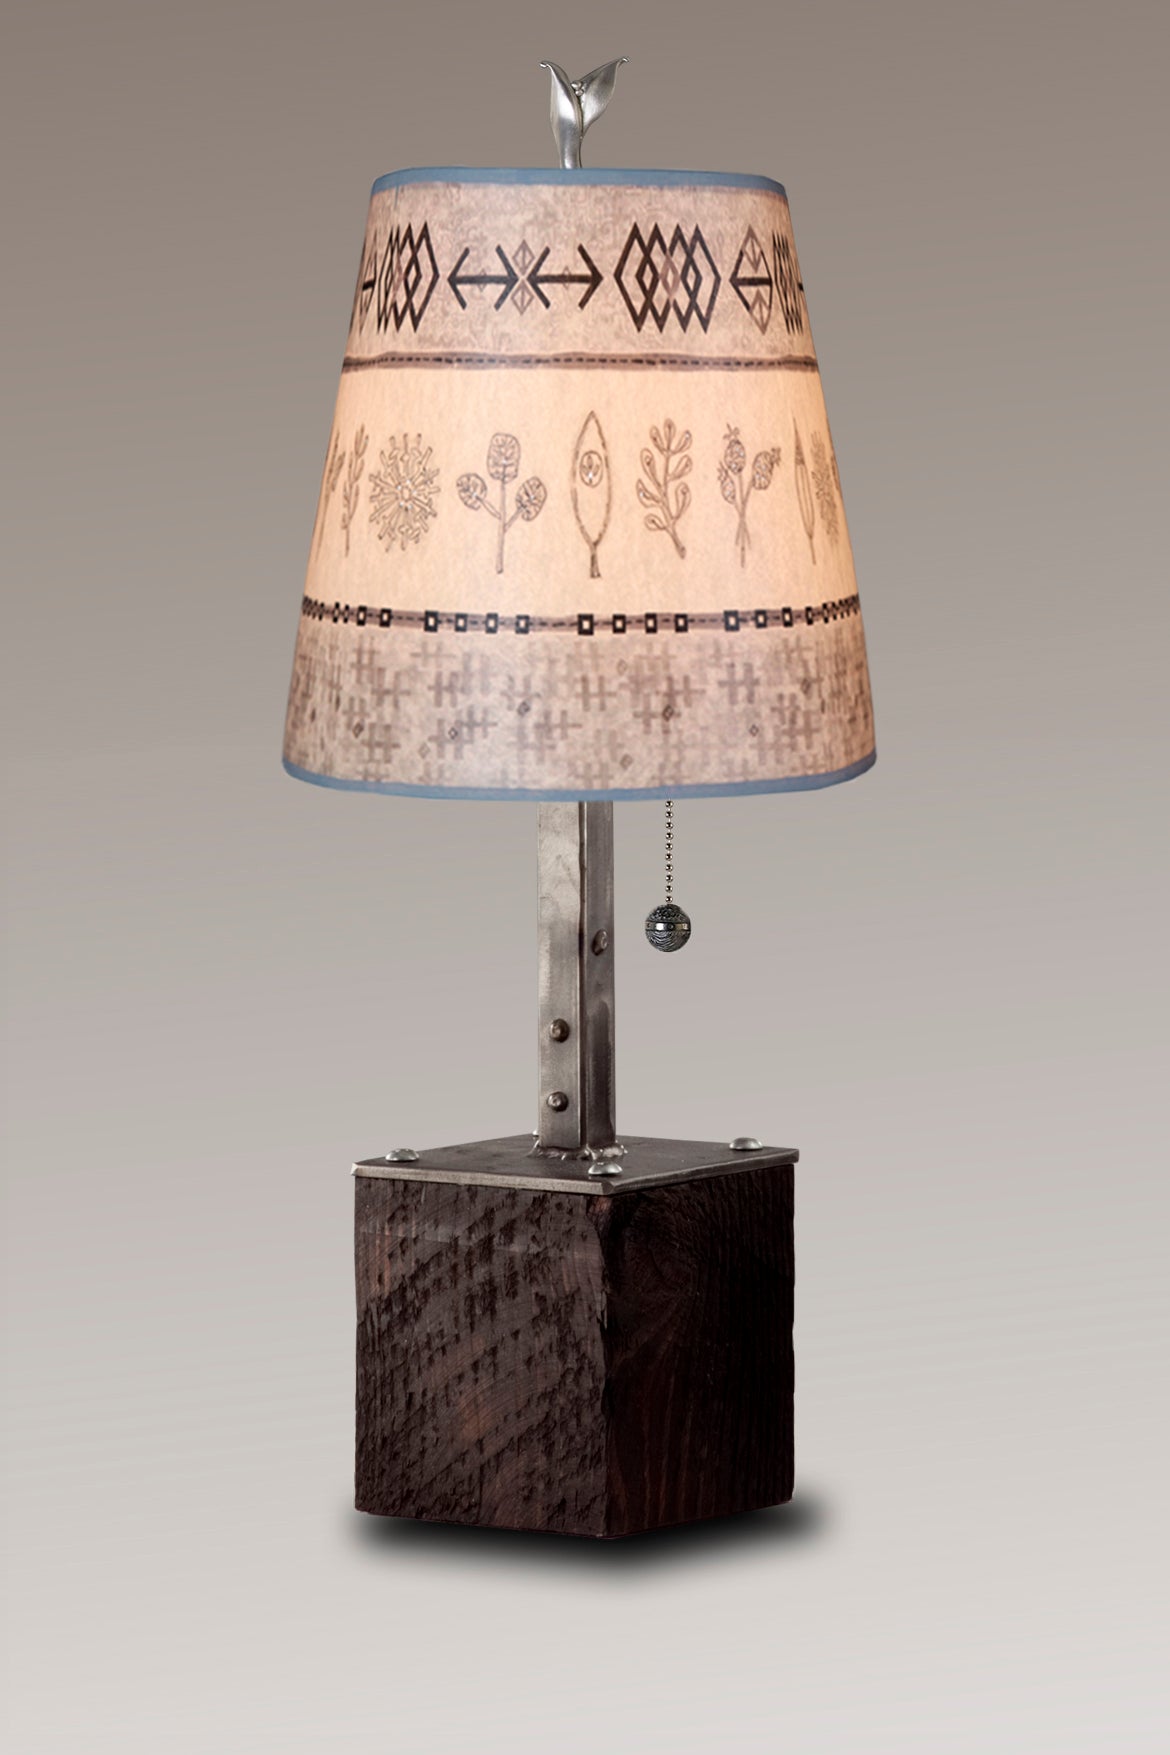 Janna Ugone & Co Table Lamps Steel Table Lamp on Reclaimed Wood with Small Drum Shade in Woven & Sprig in Mist